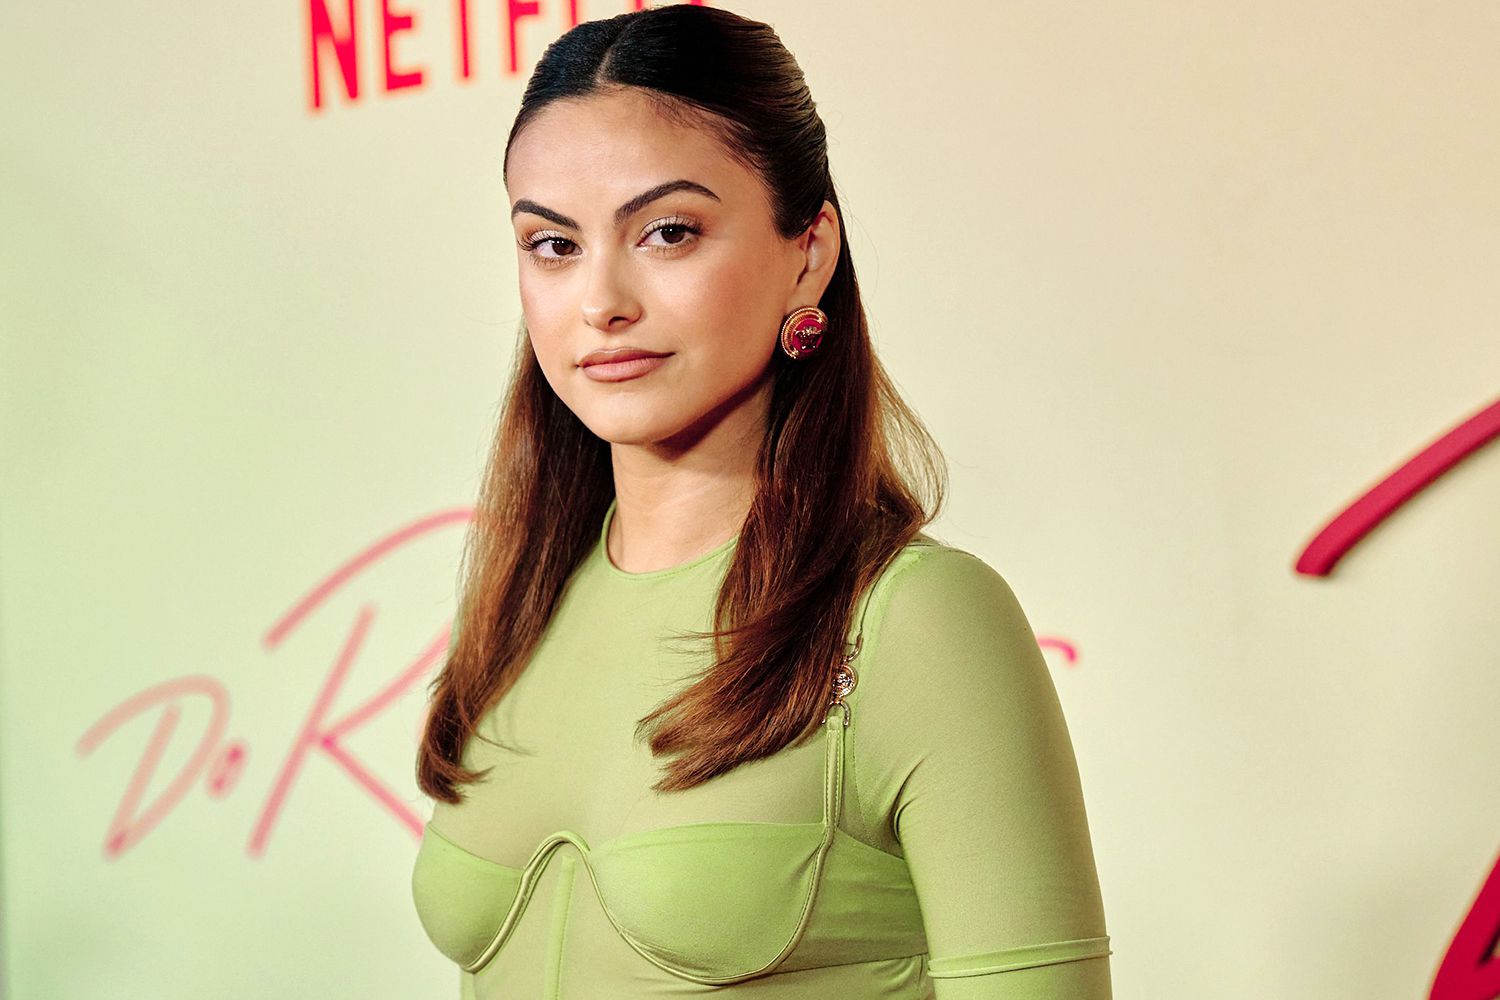 Camila Mendes wearing a green outfit